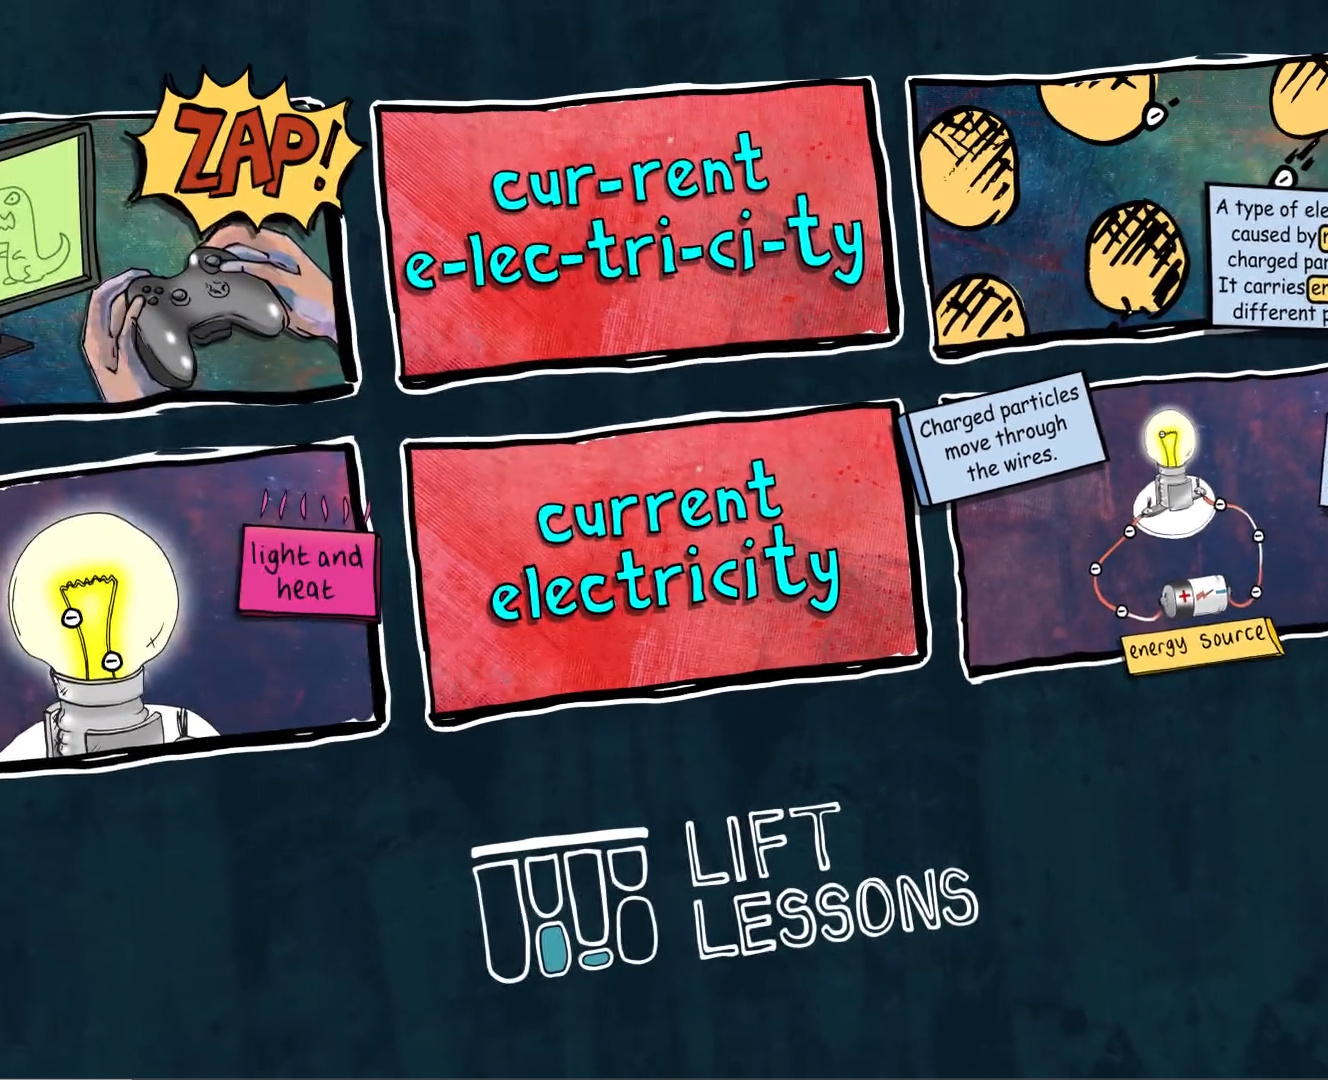 an image from a Lift Lessons science video showing the comicbook graphical style